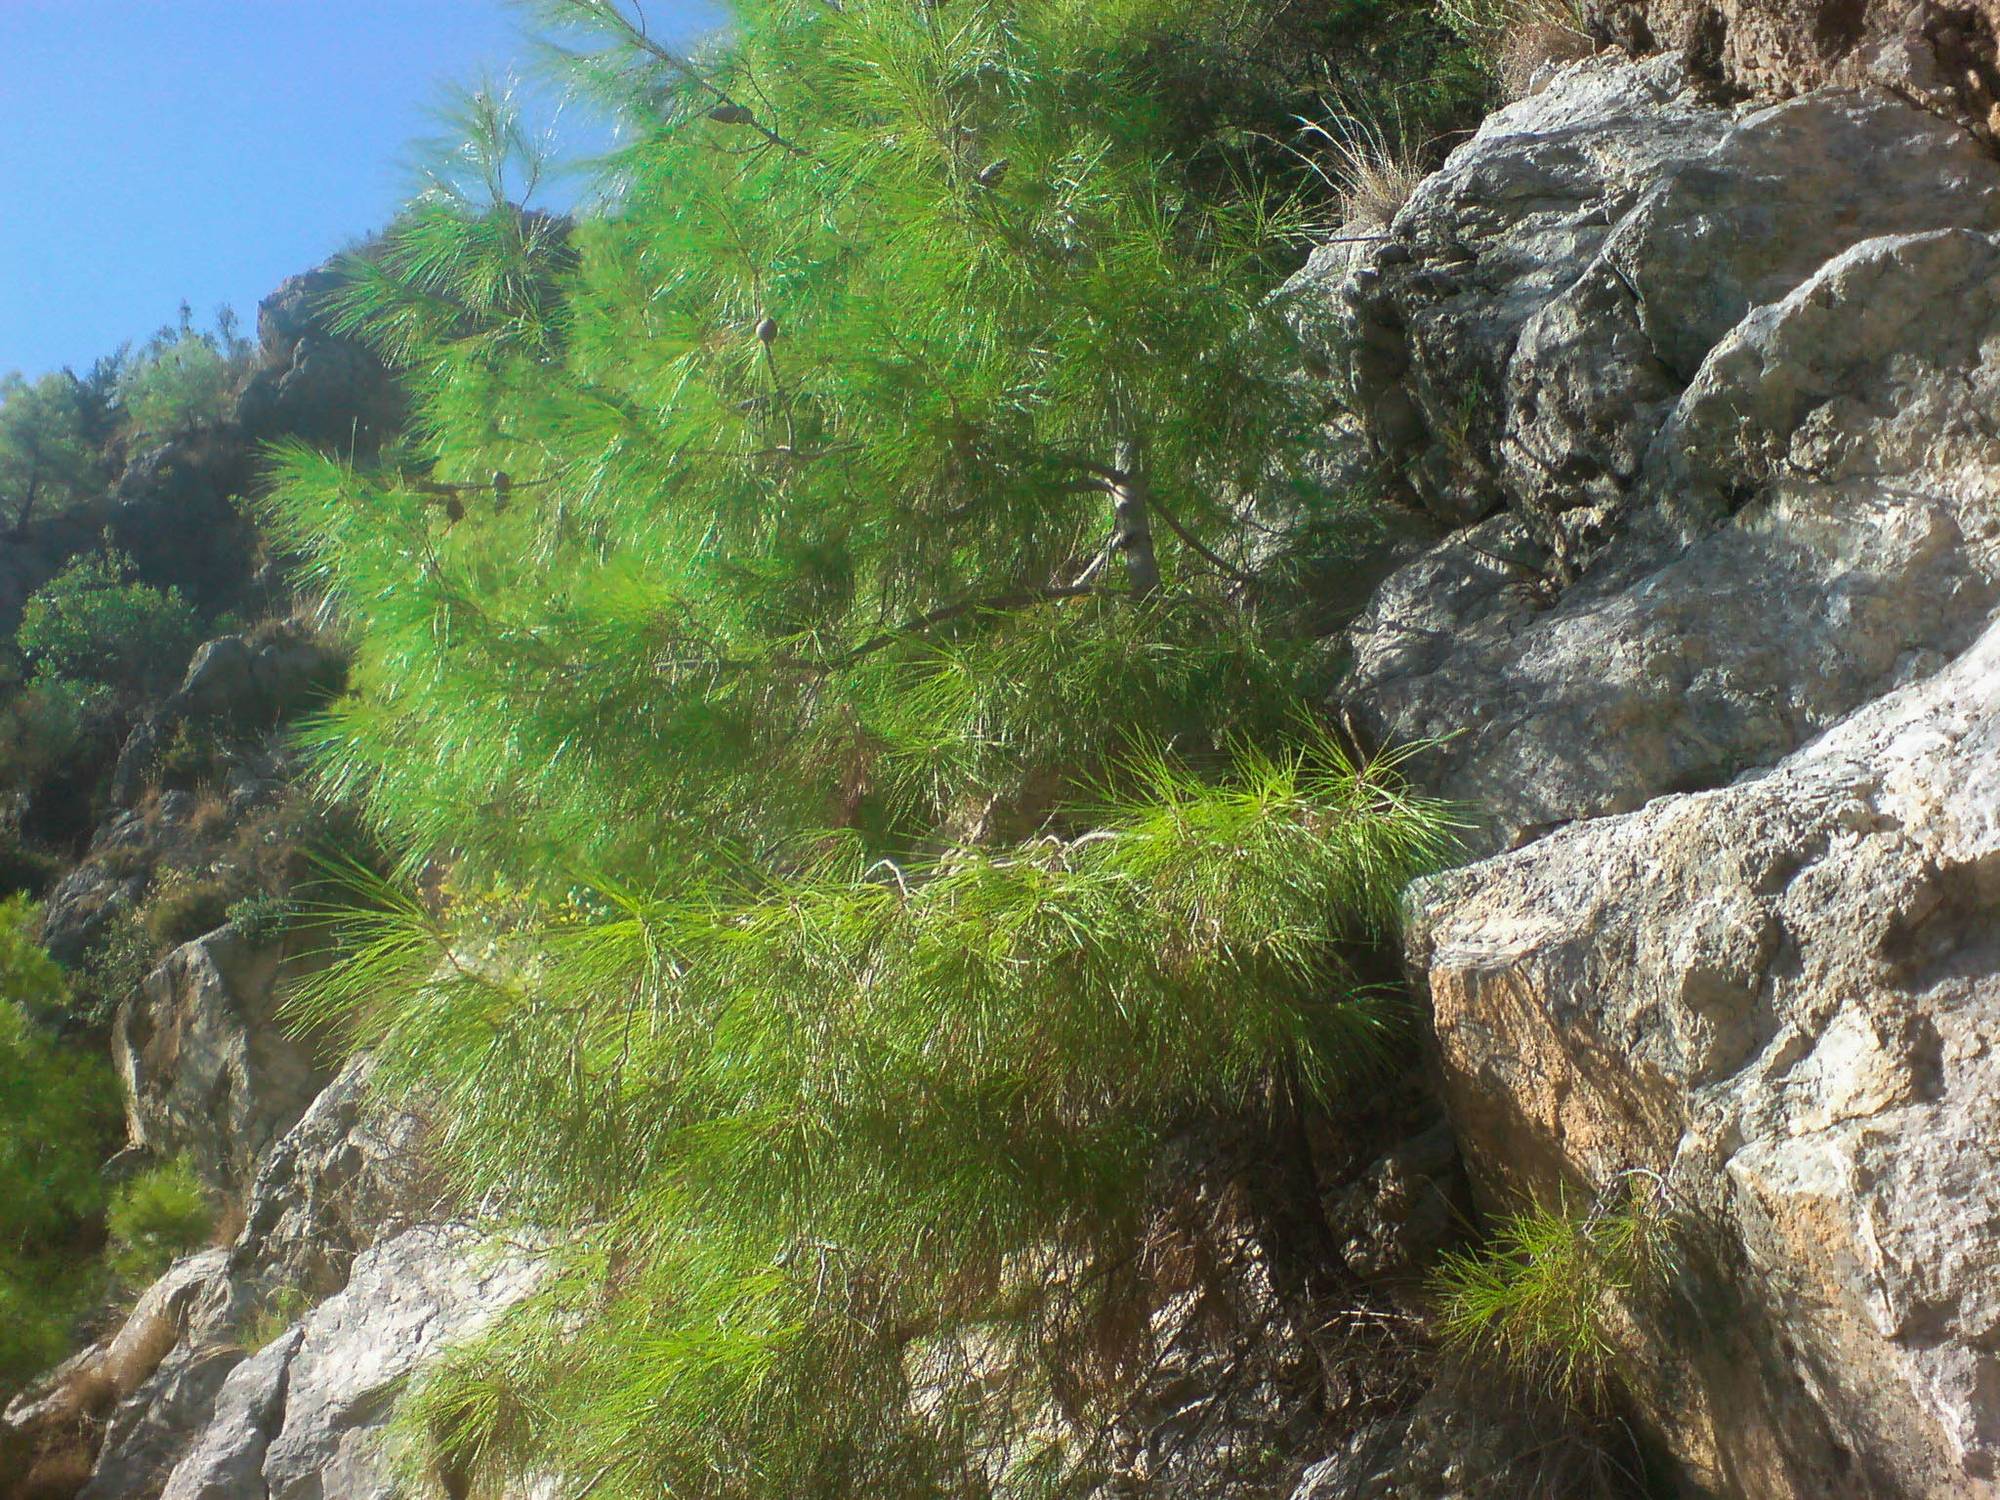 Mountain pine grows straight from the cliff at the edge of the dam